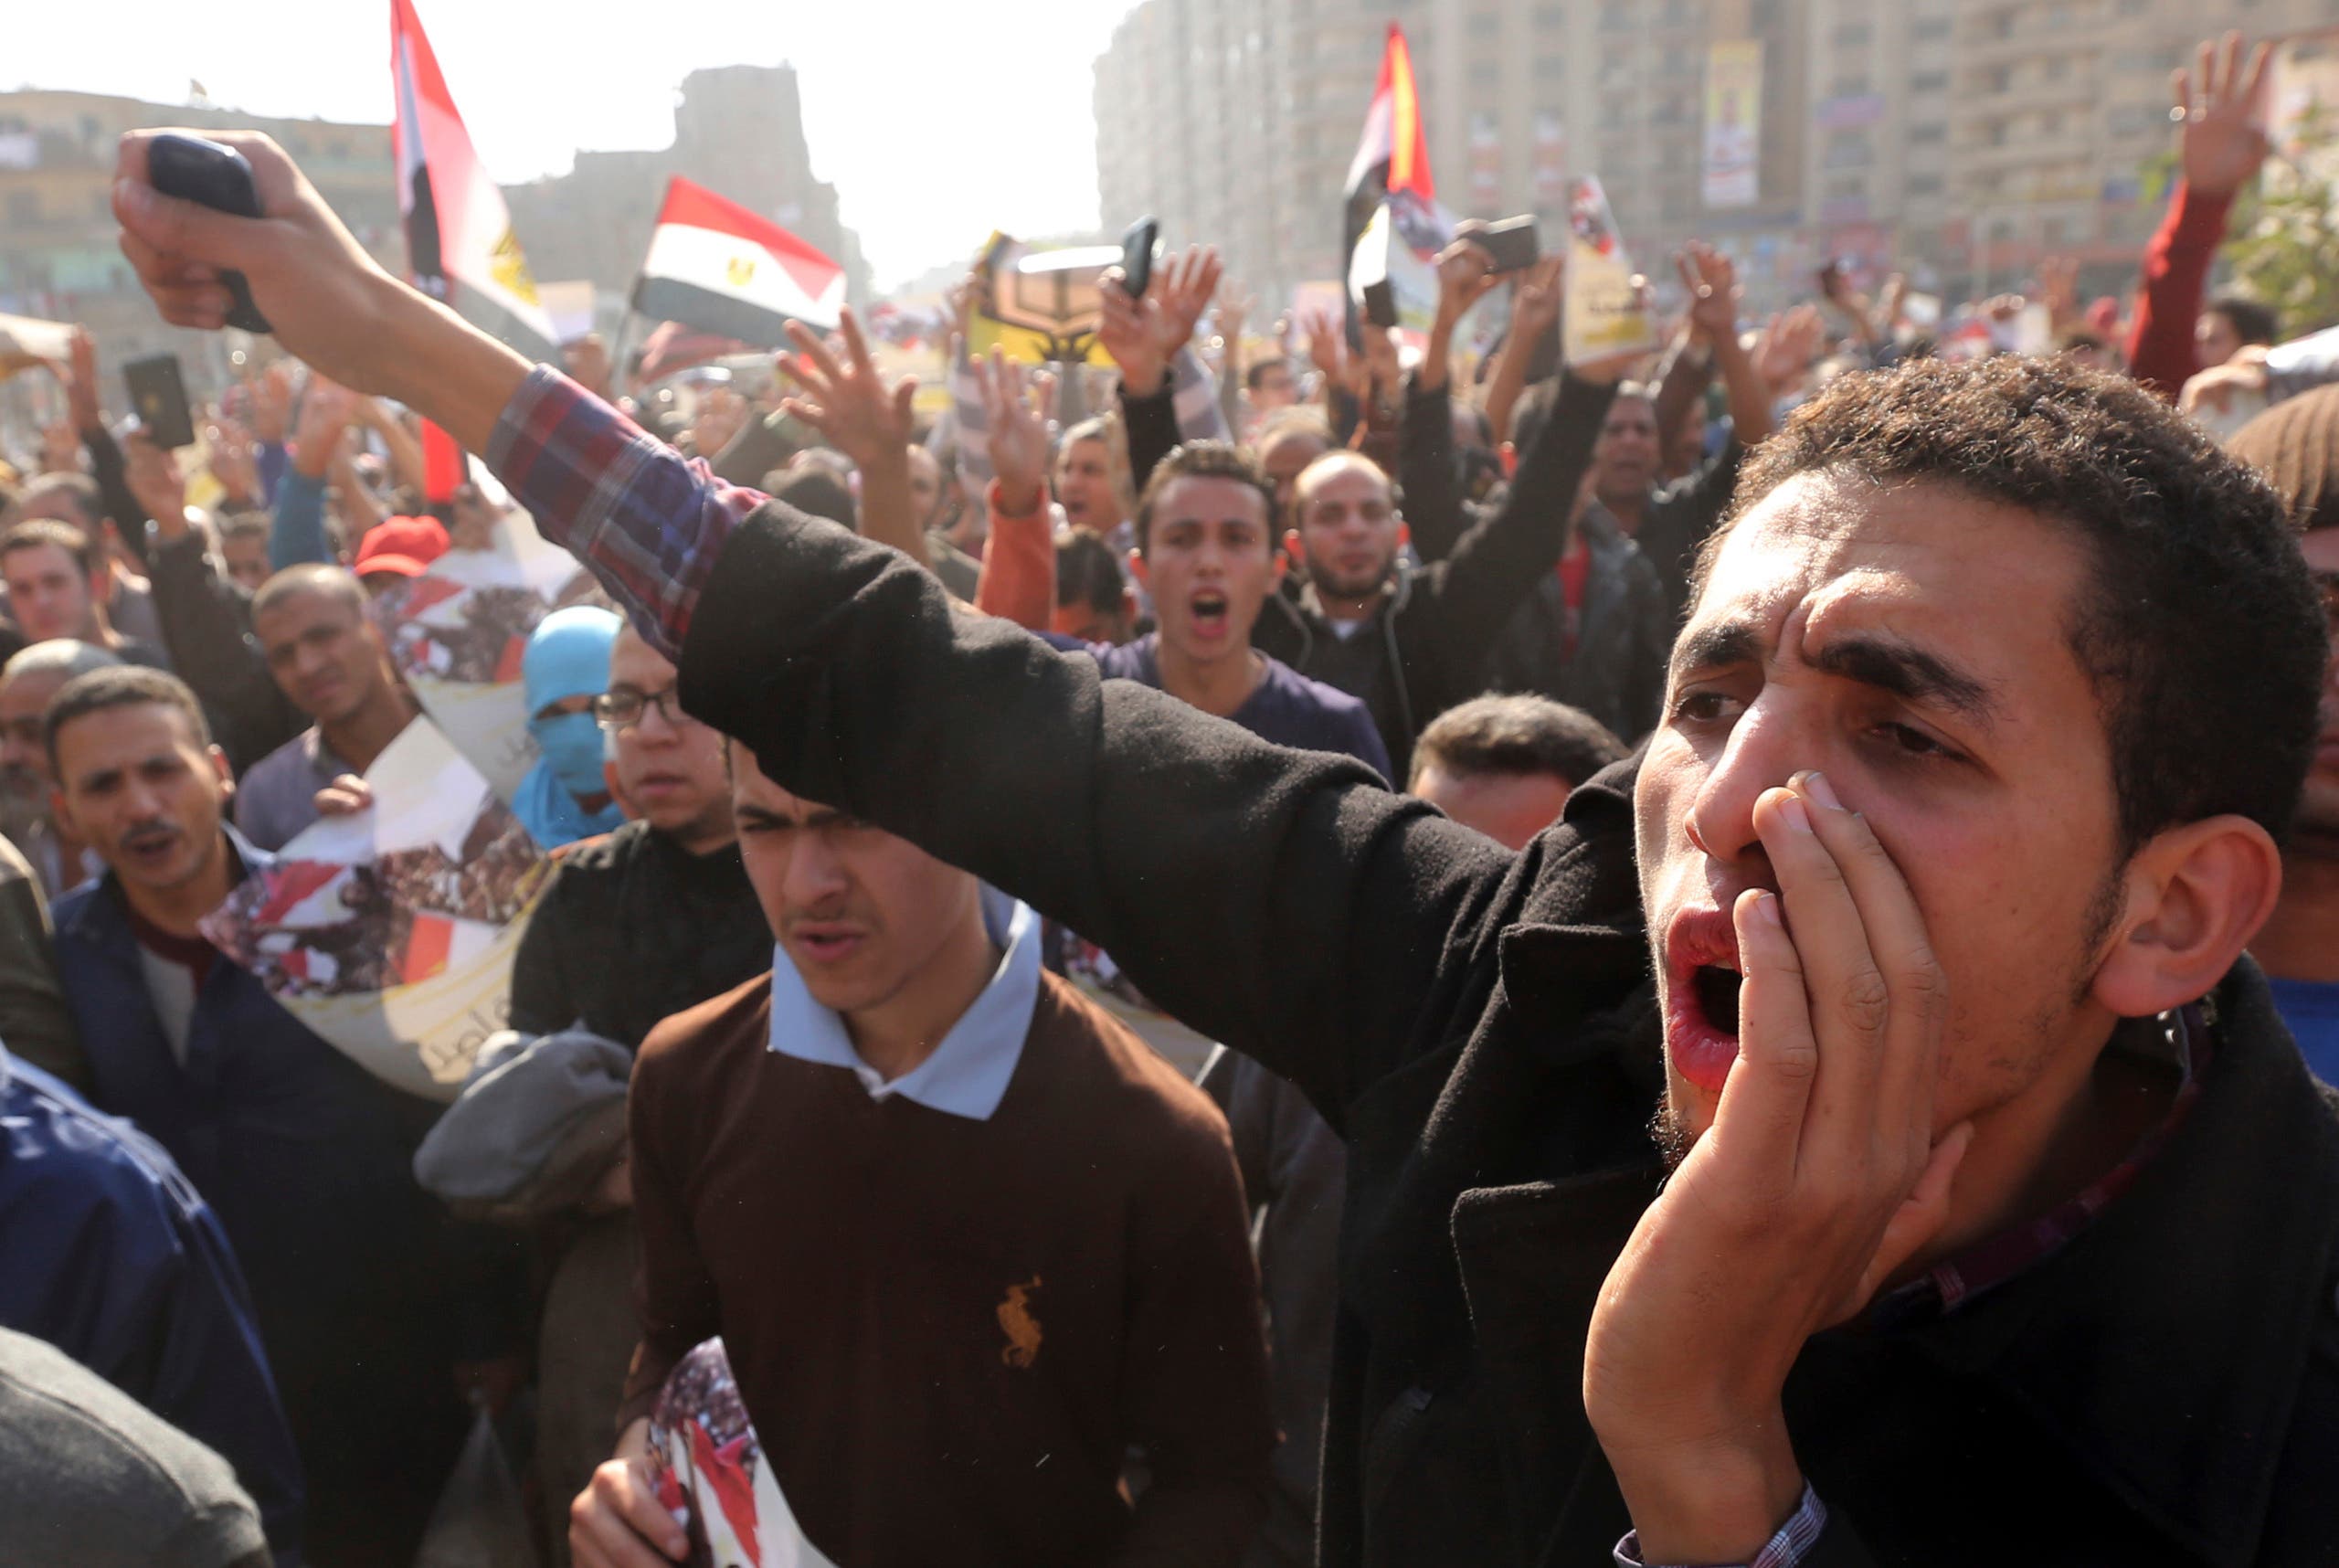 Supporters of the Muslim Brotherhood and ousted Egyptian President Mohamed Mursi shout slogans against the military and the interior ministry during a protest in Cairo November 28, 2014. (File photo: Reuters)